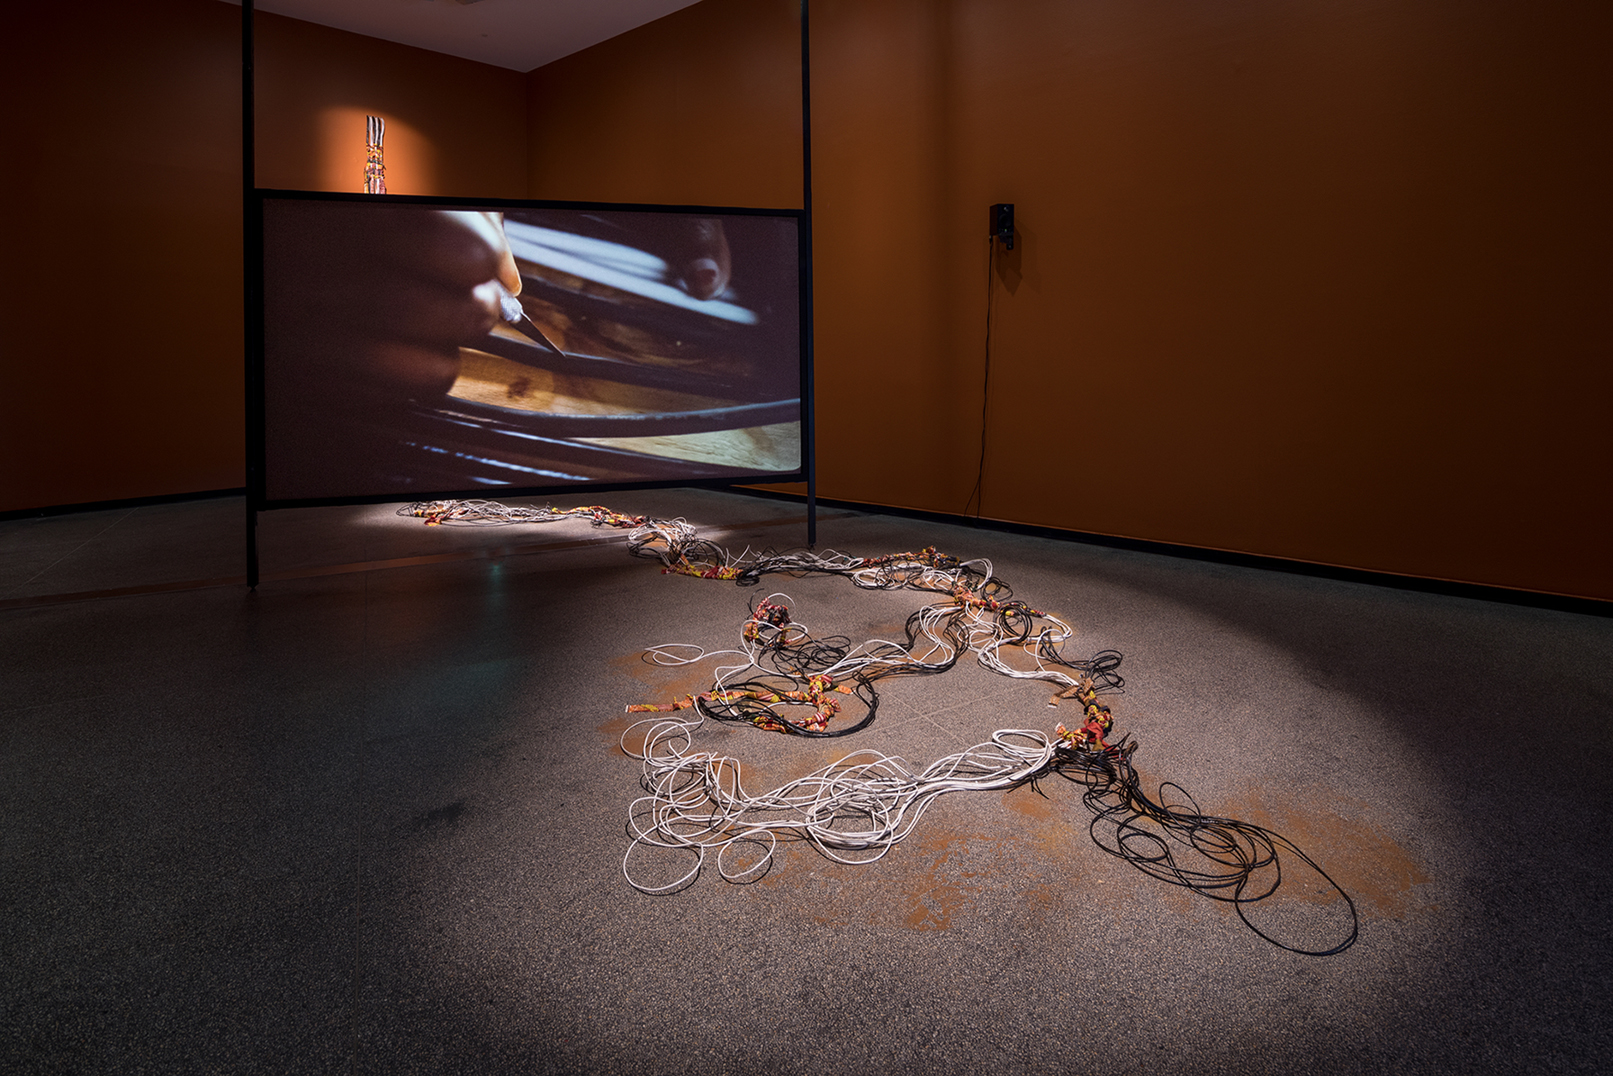 Pictured is a mixed media installation of cables, cloth, hair, dust, spices and herbs braided and intermingled together, which flows behind a screen featuring a video, onto the floor in front and loops around. Gesture of modern technical systems mixed with values and artistry and practices from other cultures.